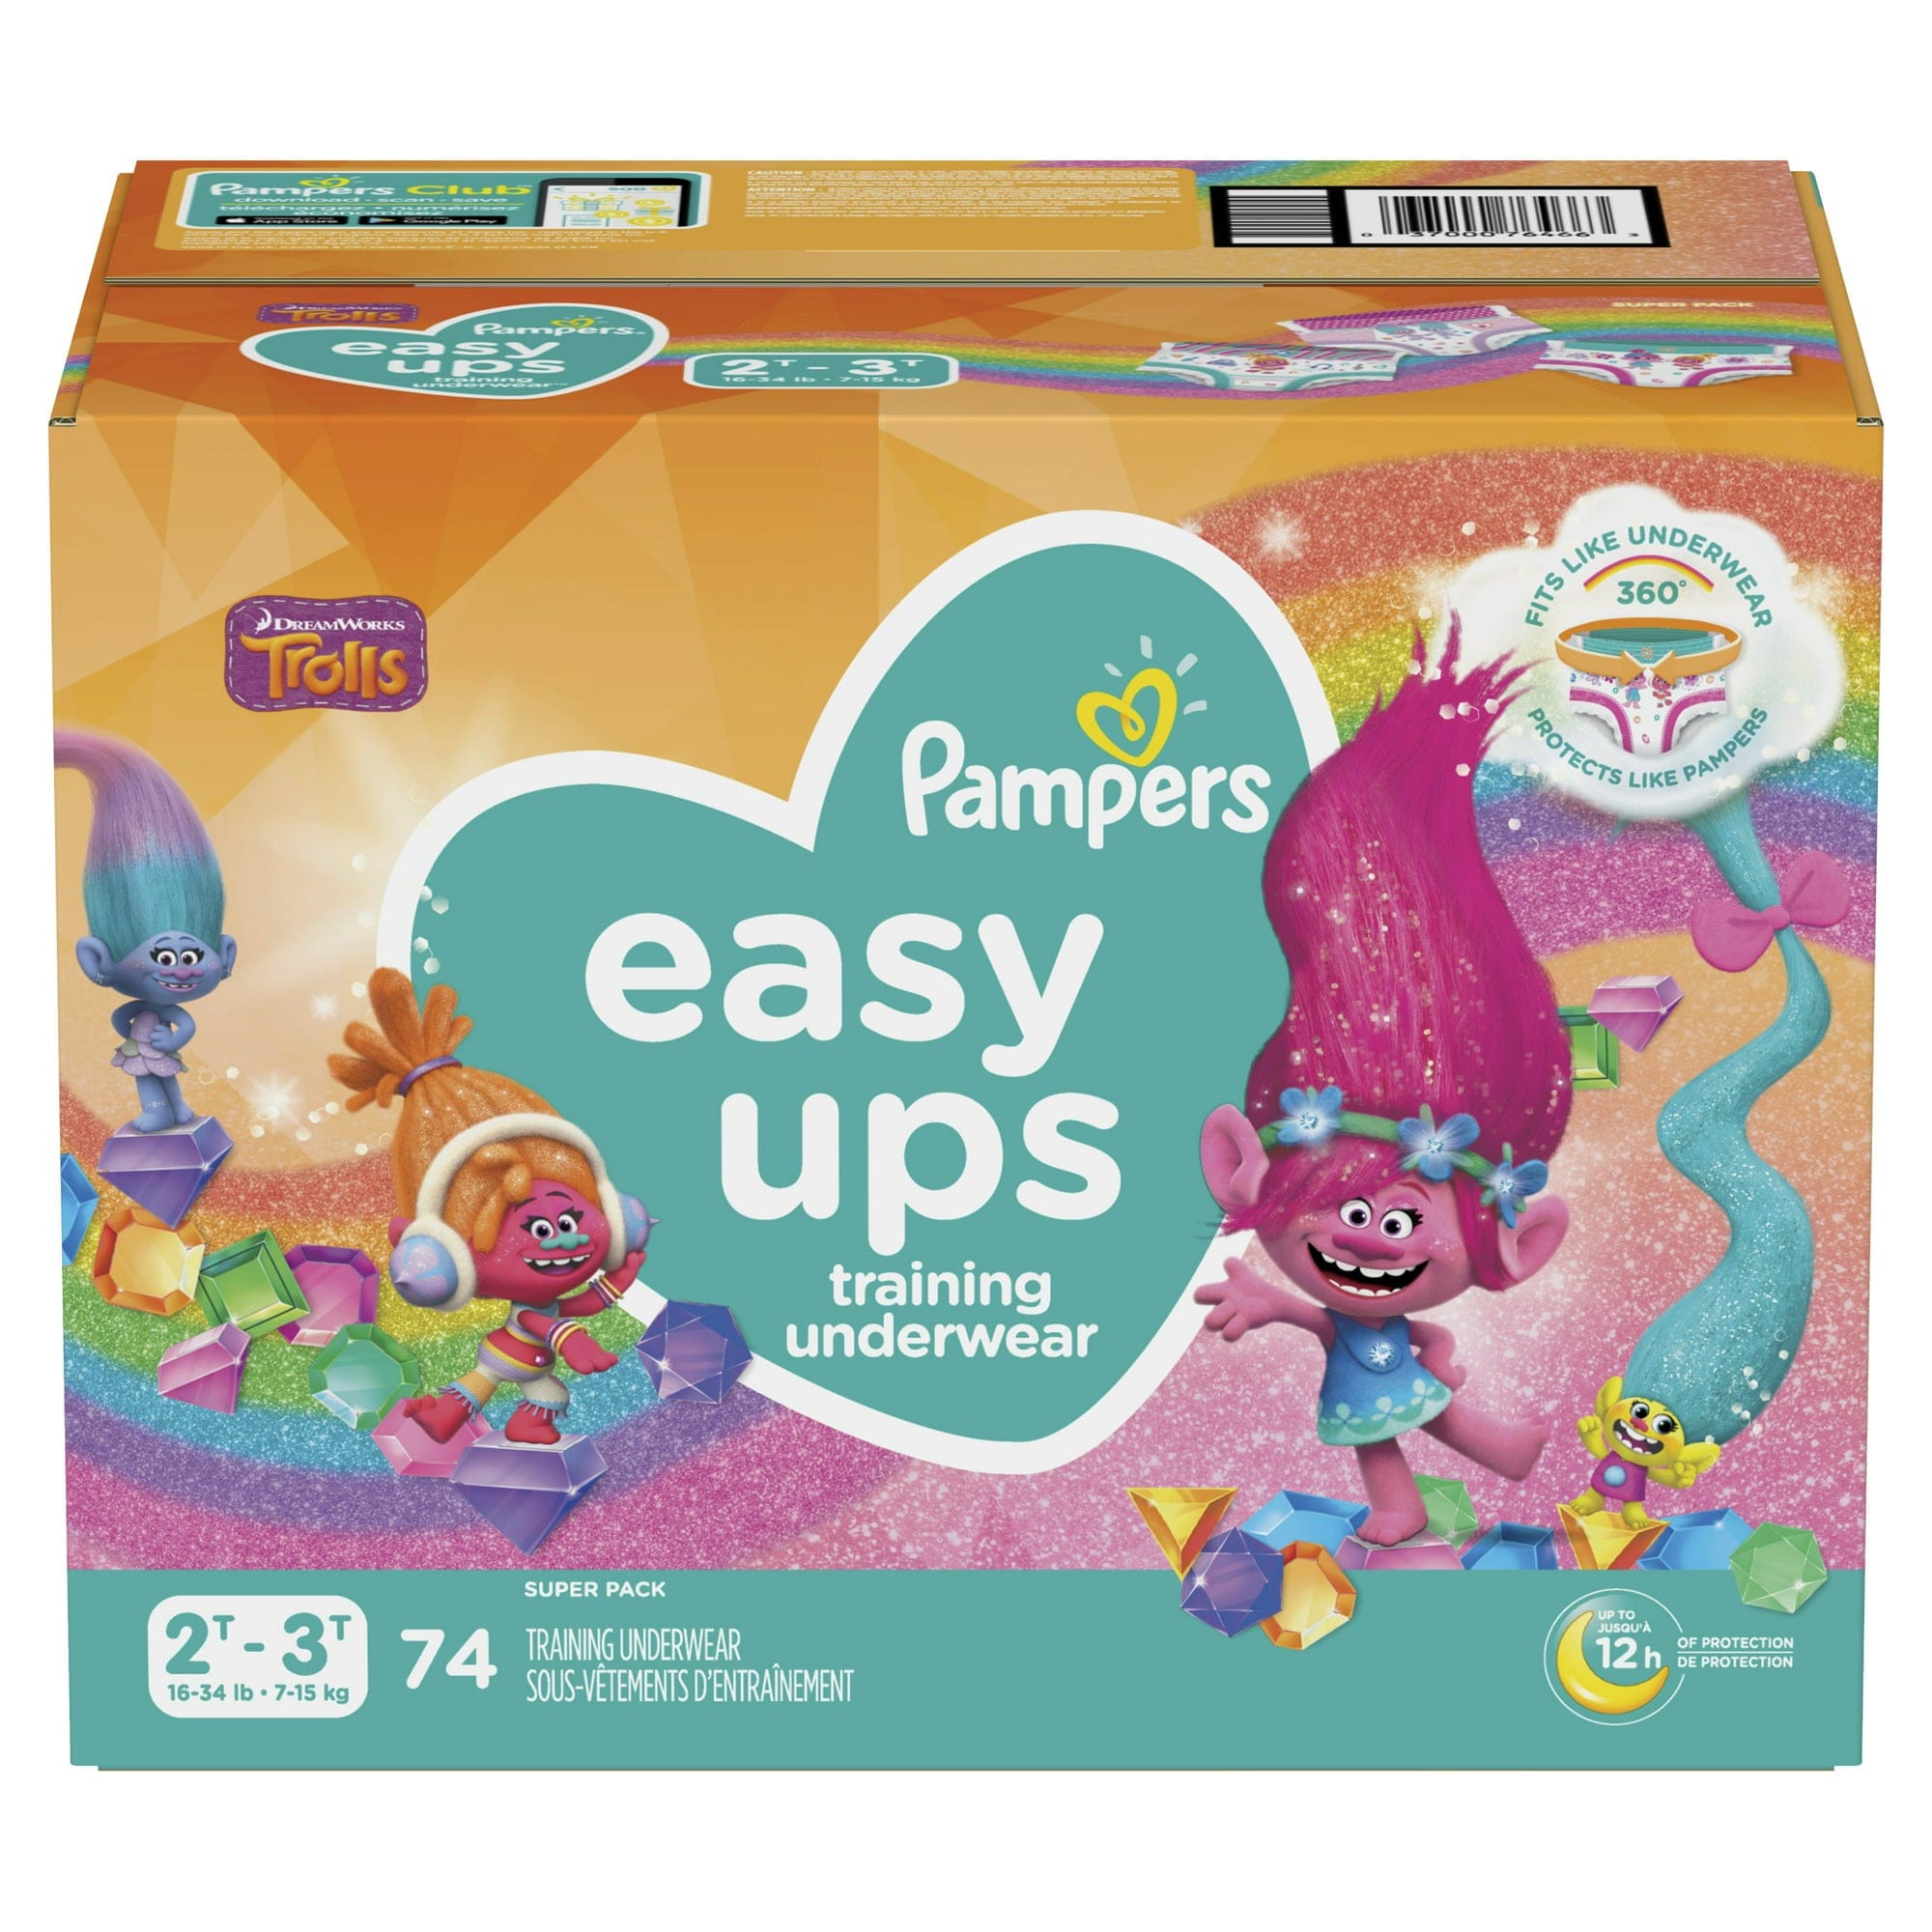 Pampers Easy Ups Training Pants Girls 2T-3T (16-34 lbs), 74 count